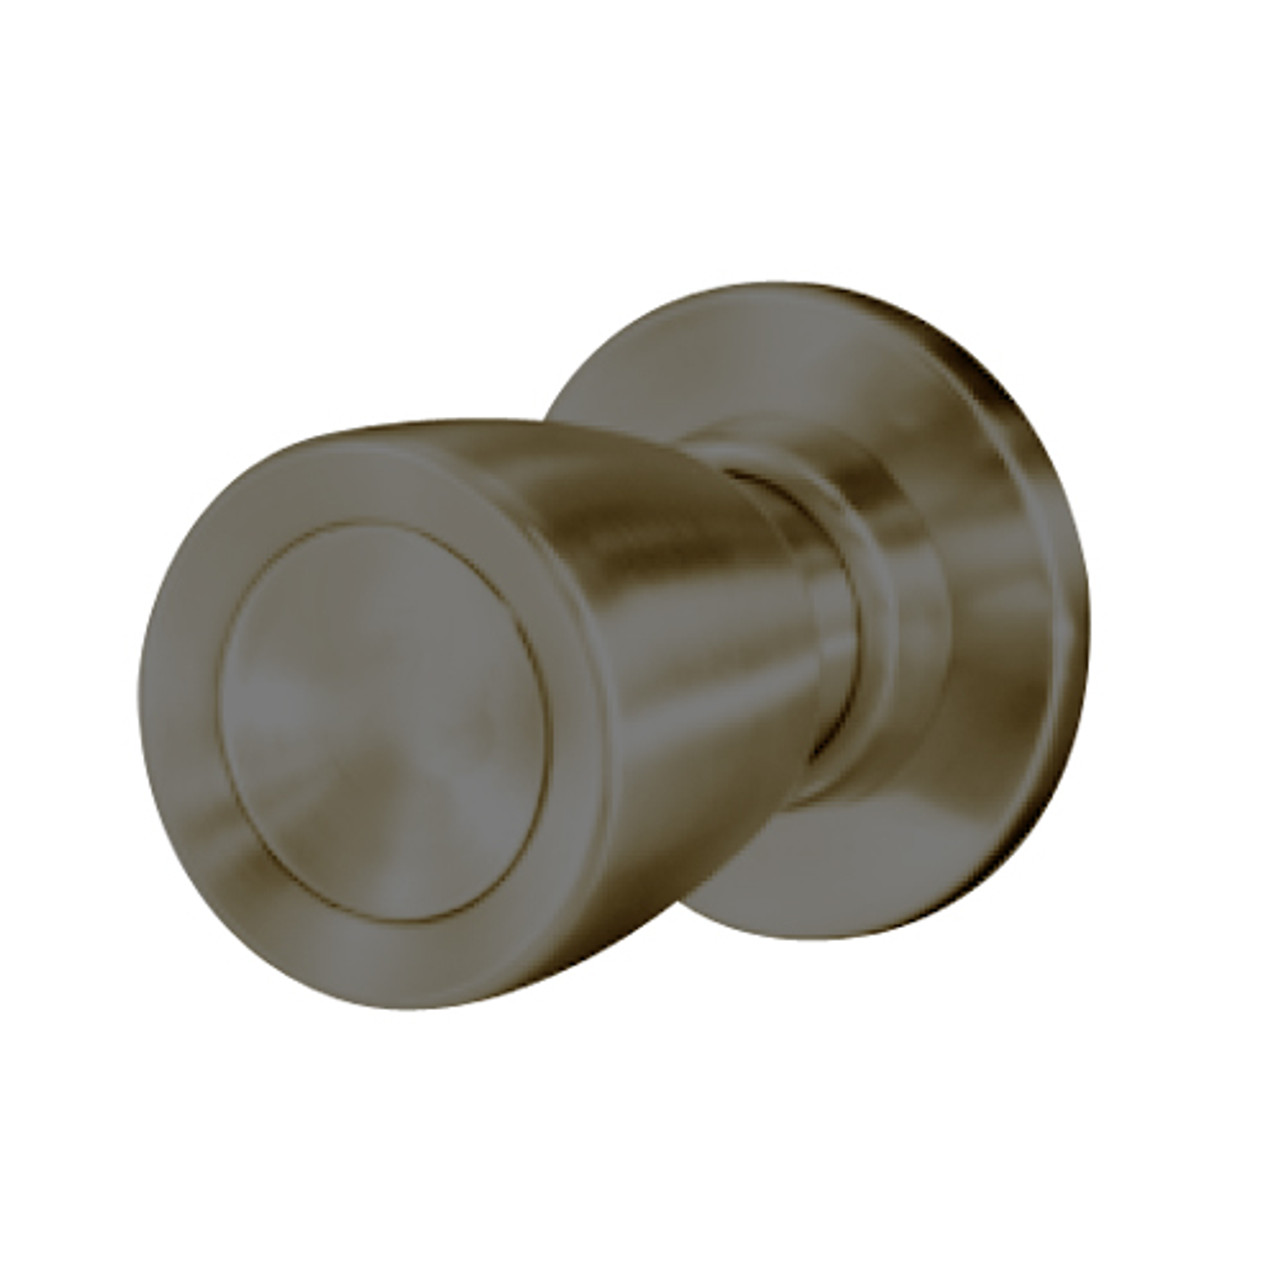 8K30Z6CS3613 Best 8K Series Closet Heavy Duty Cylindrical Knob Locks with Tulip Style in Oil Rubbed Bronze